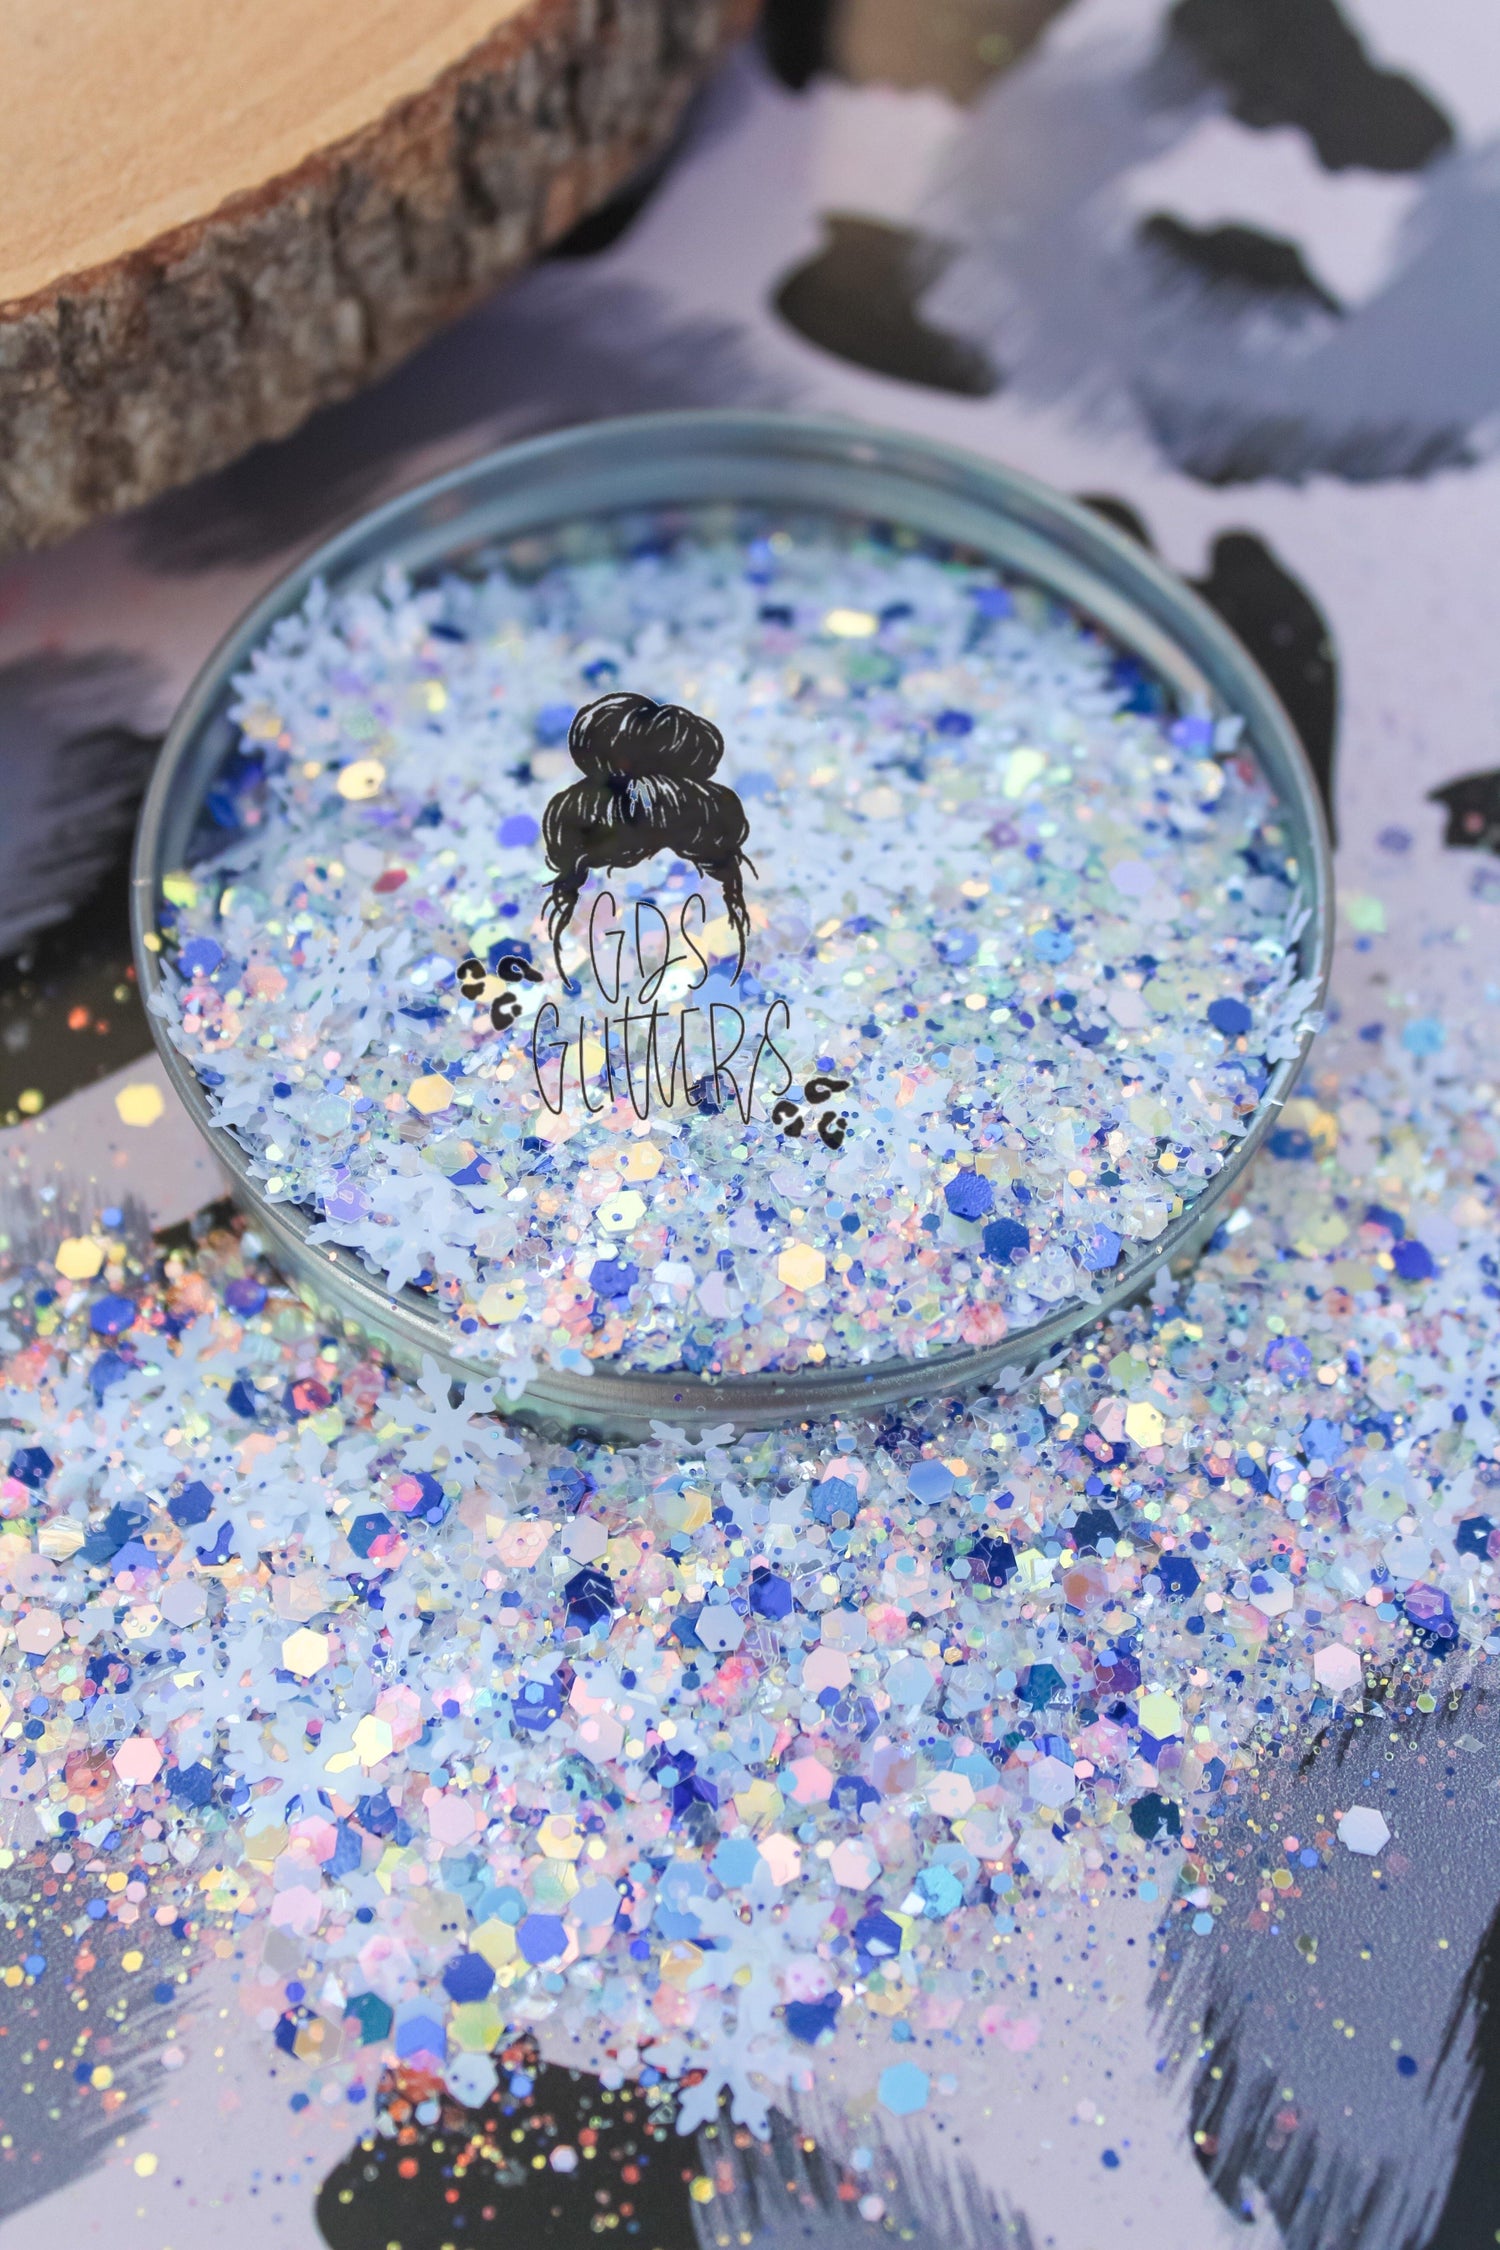 Ice queen chunky glitter for crafting